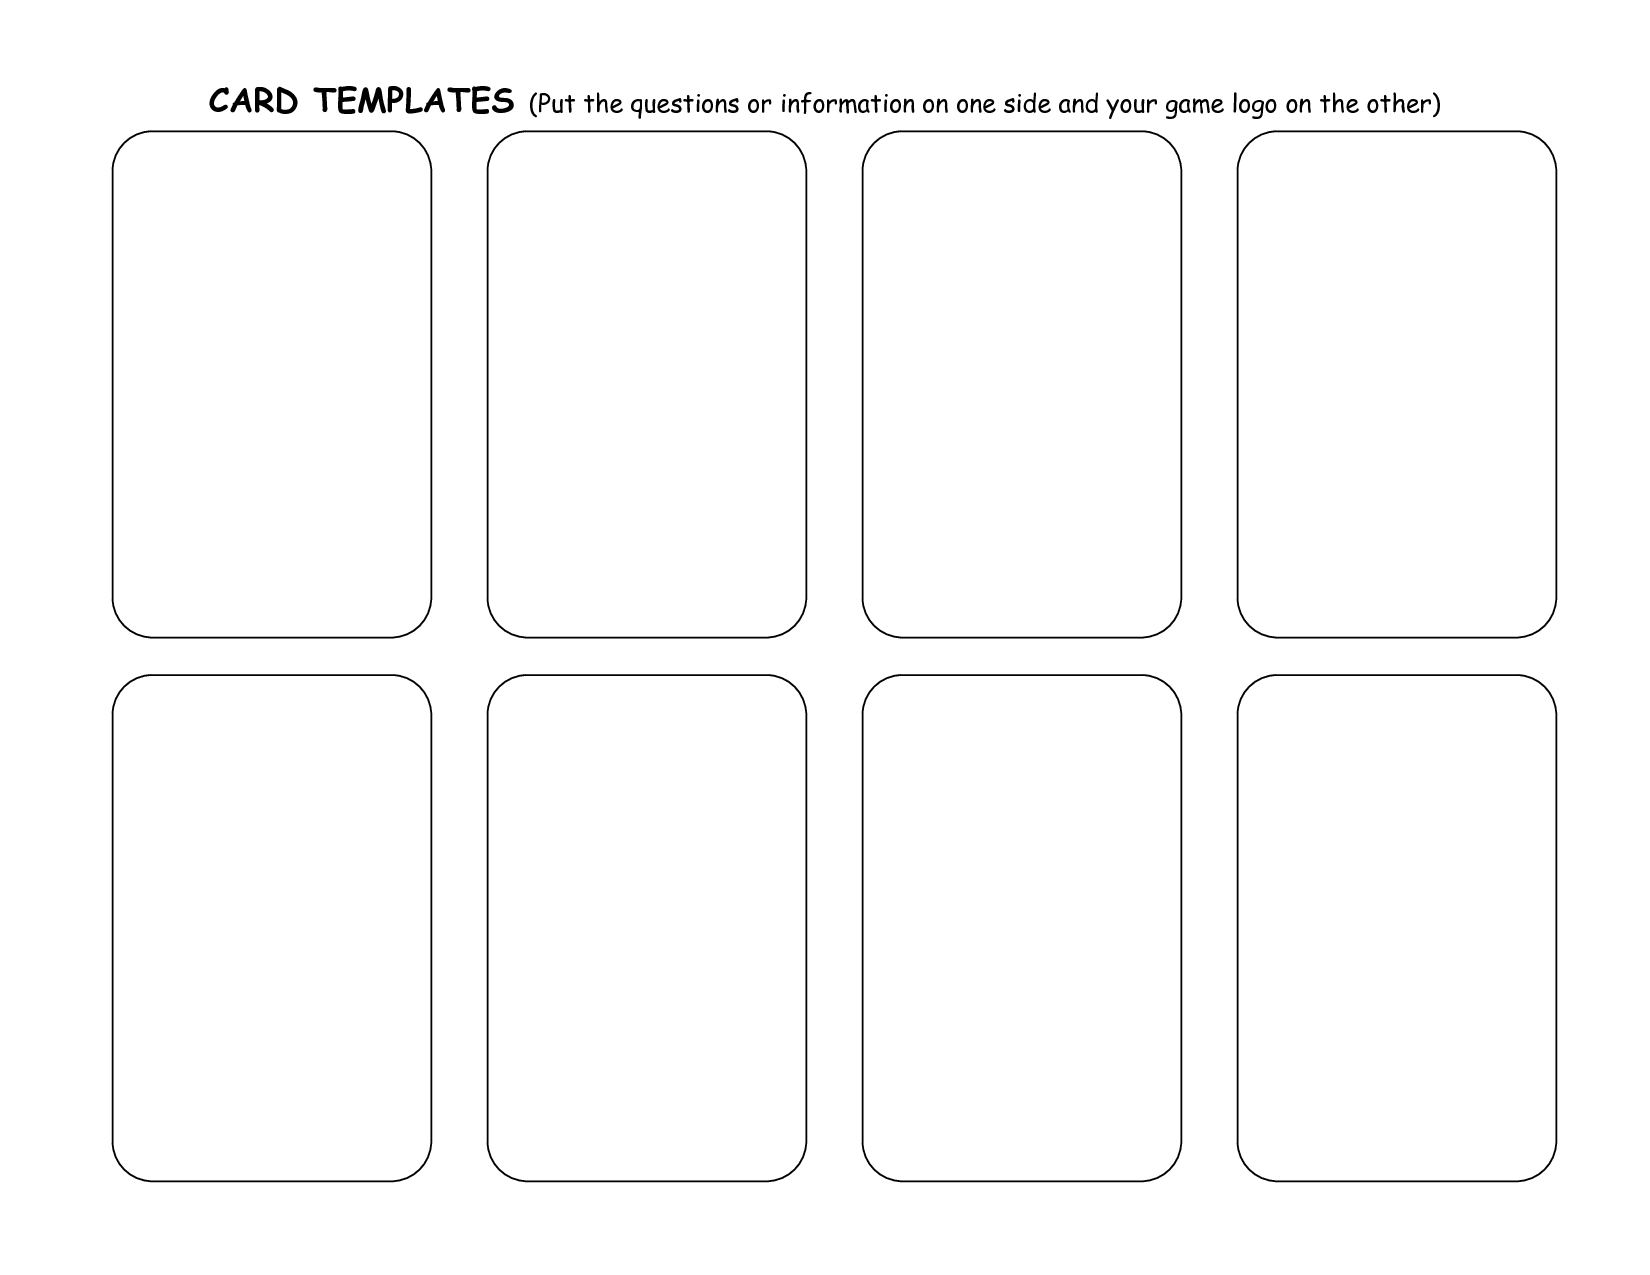 Blank Playing Card Template | One day | Pinterest